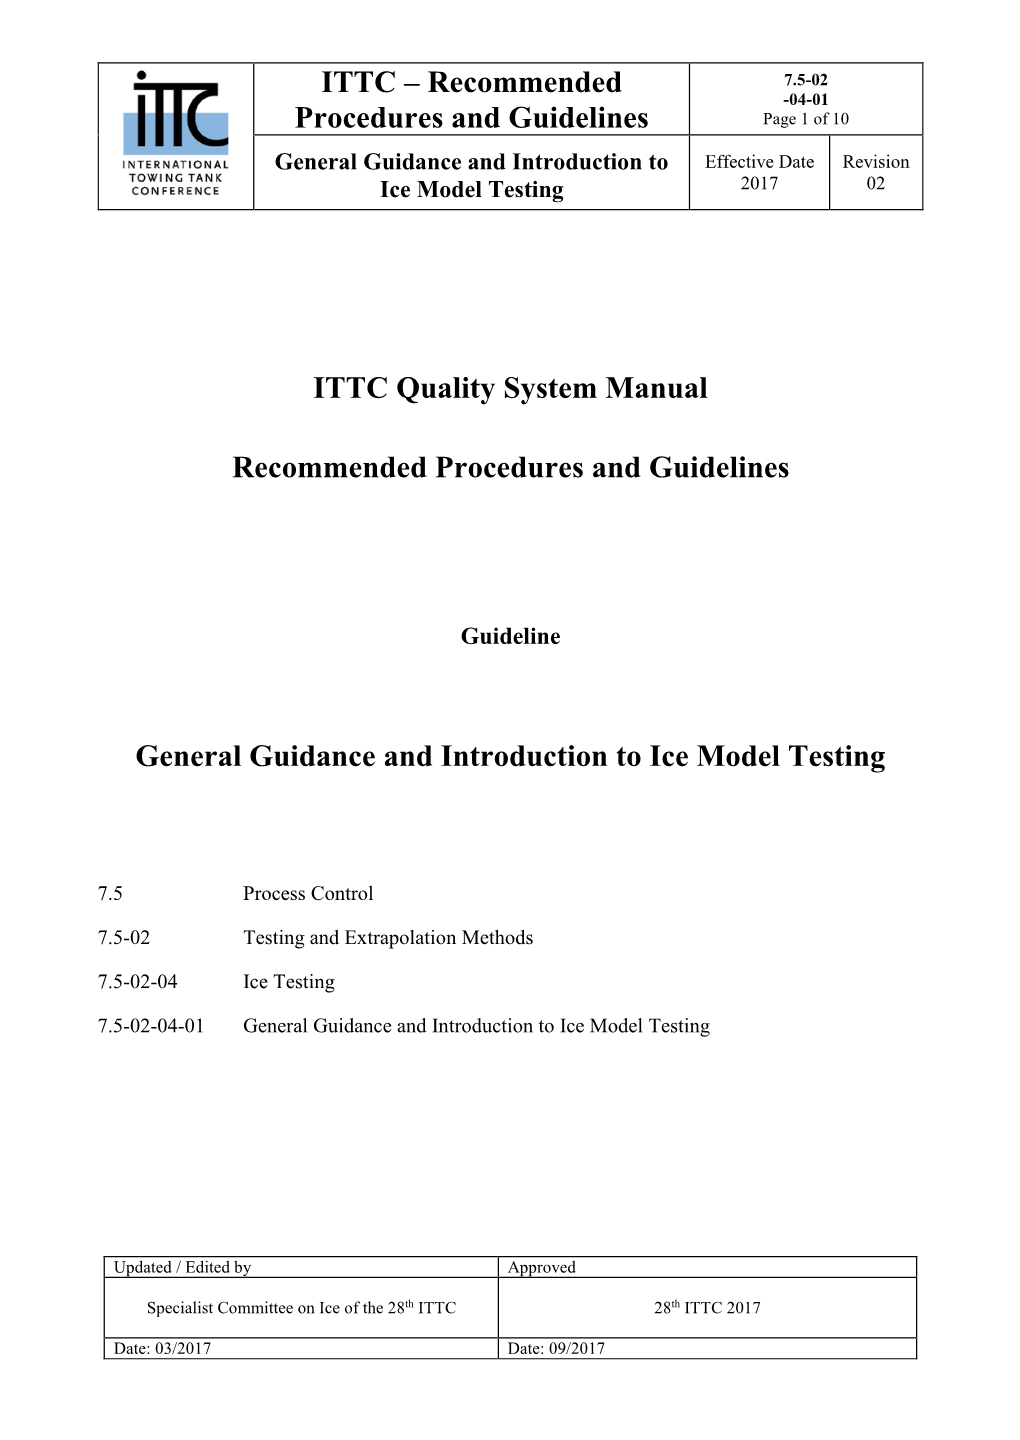 General Guidance and Introduction to Ice Model Testing